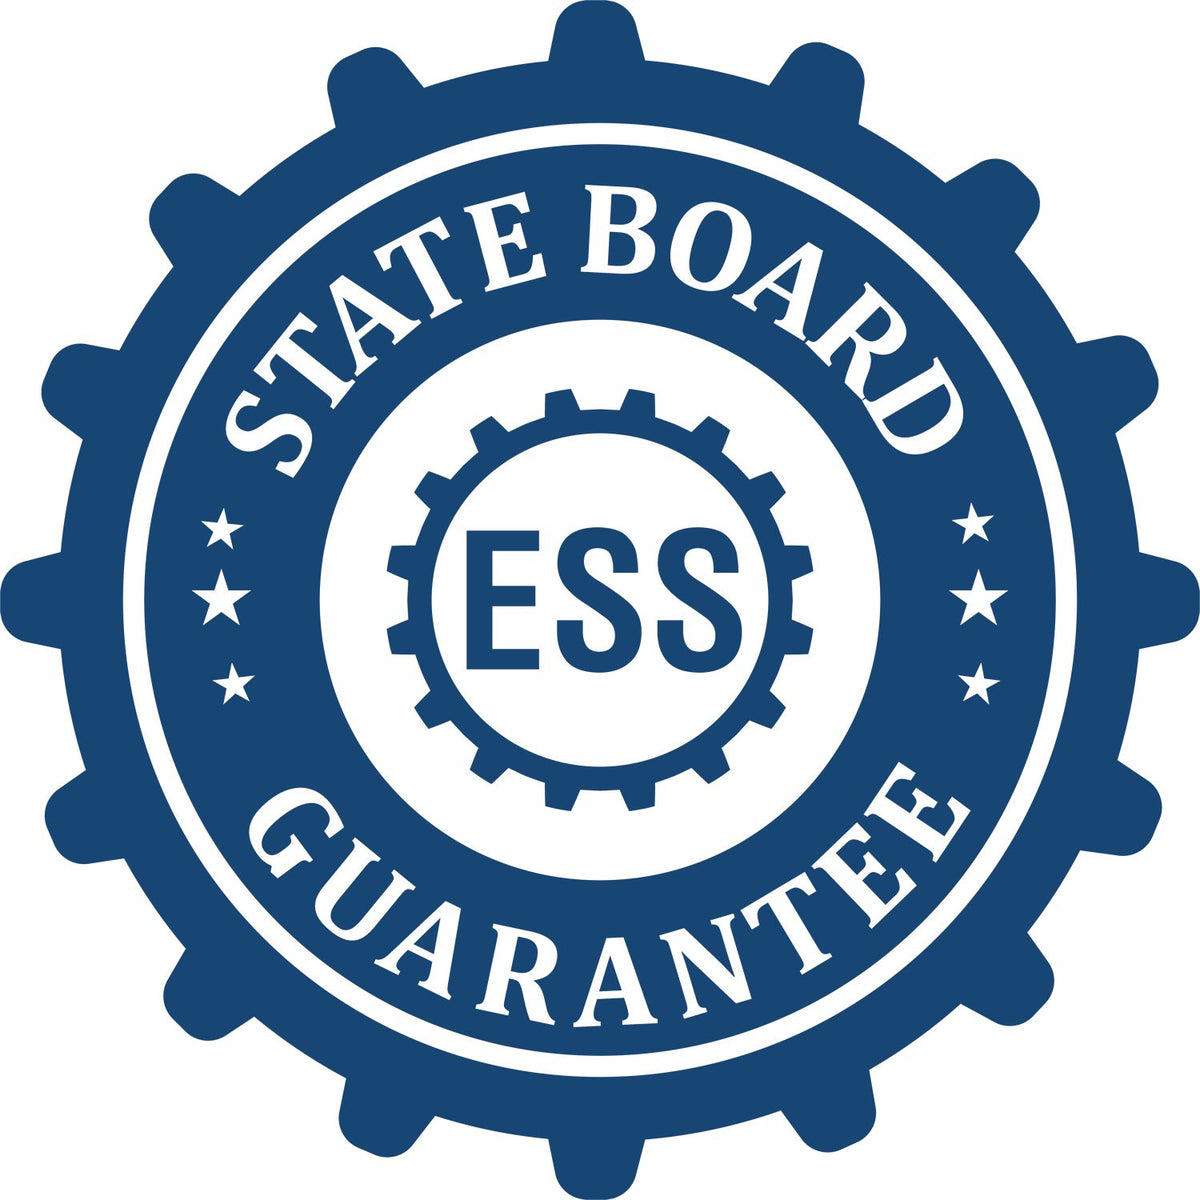 An emblem in a gear shape illustrating a state board guarantee for the Soft Iowa Professional Engineer Seal product.